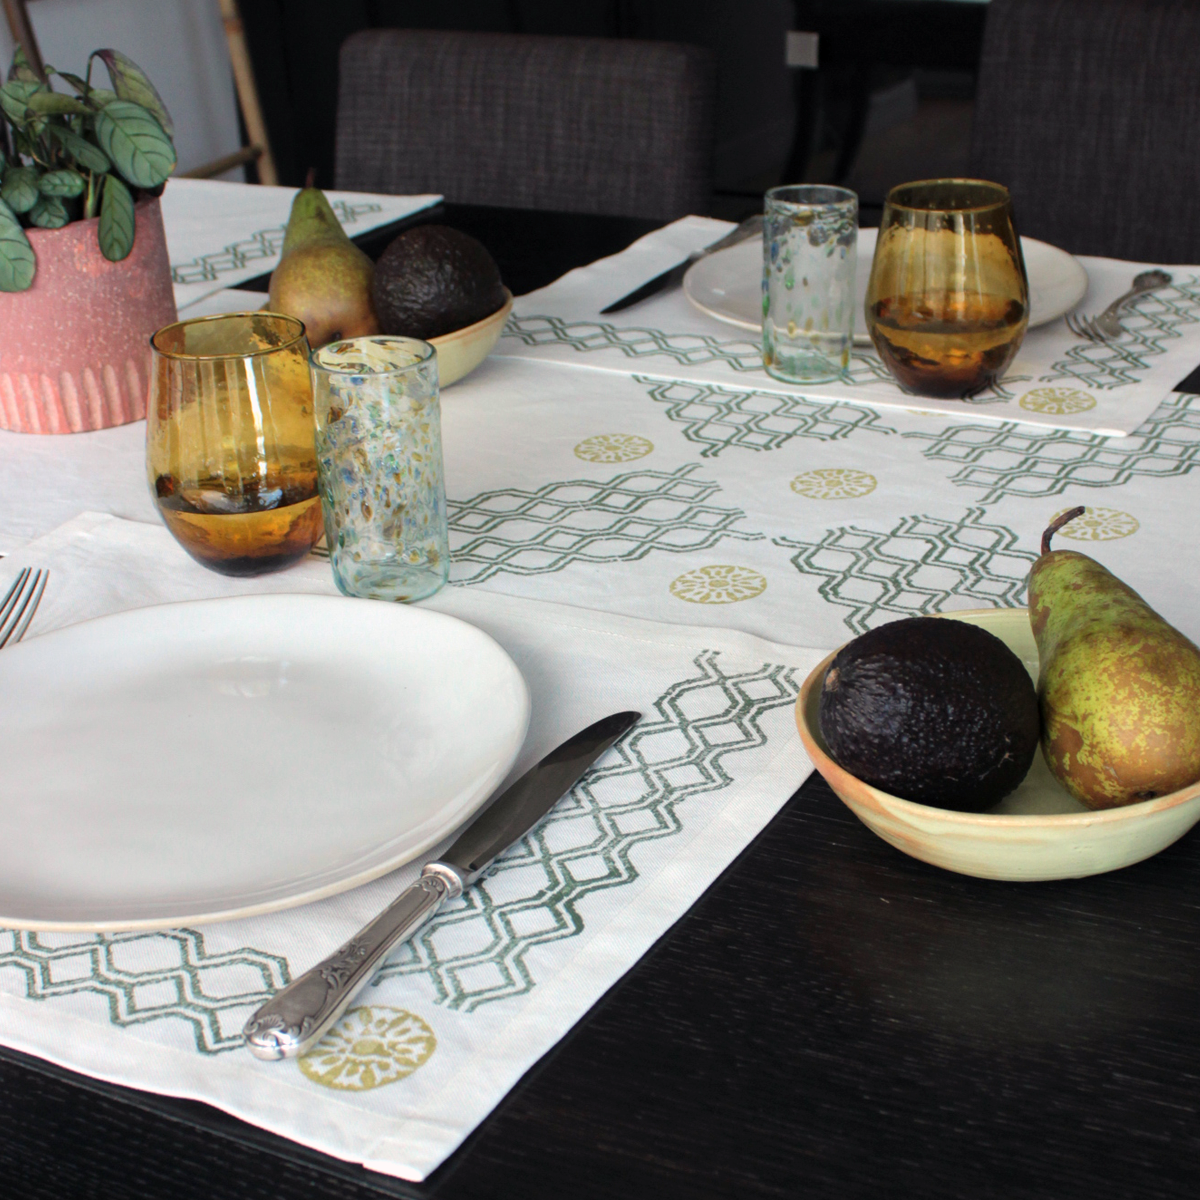 Country Chic: Linen Block Print Placemats and Runner for Table Decor